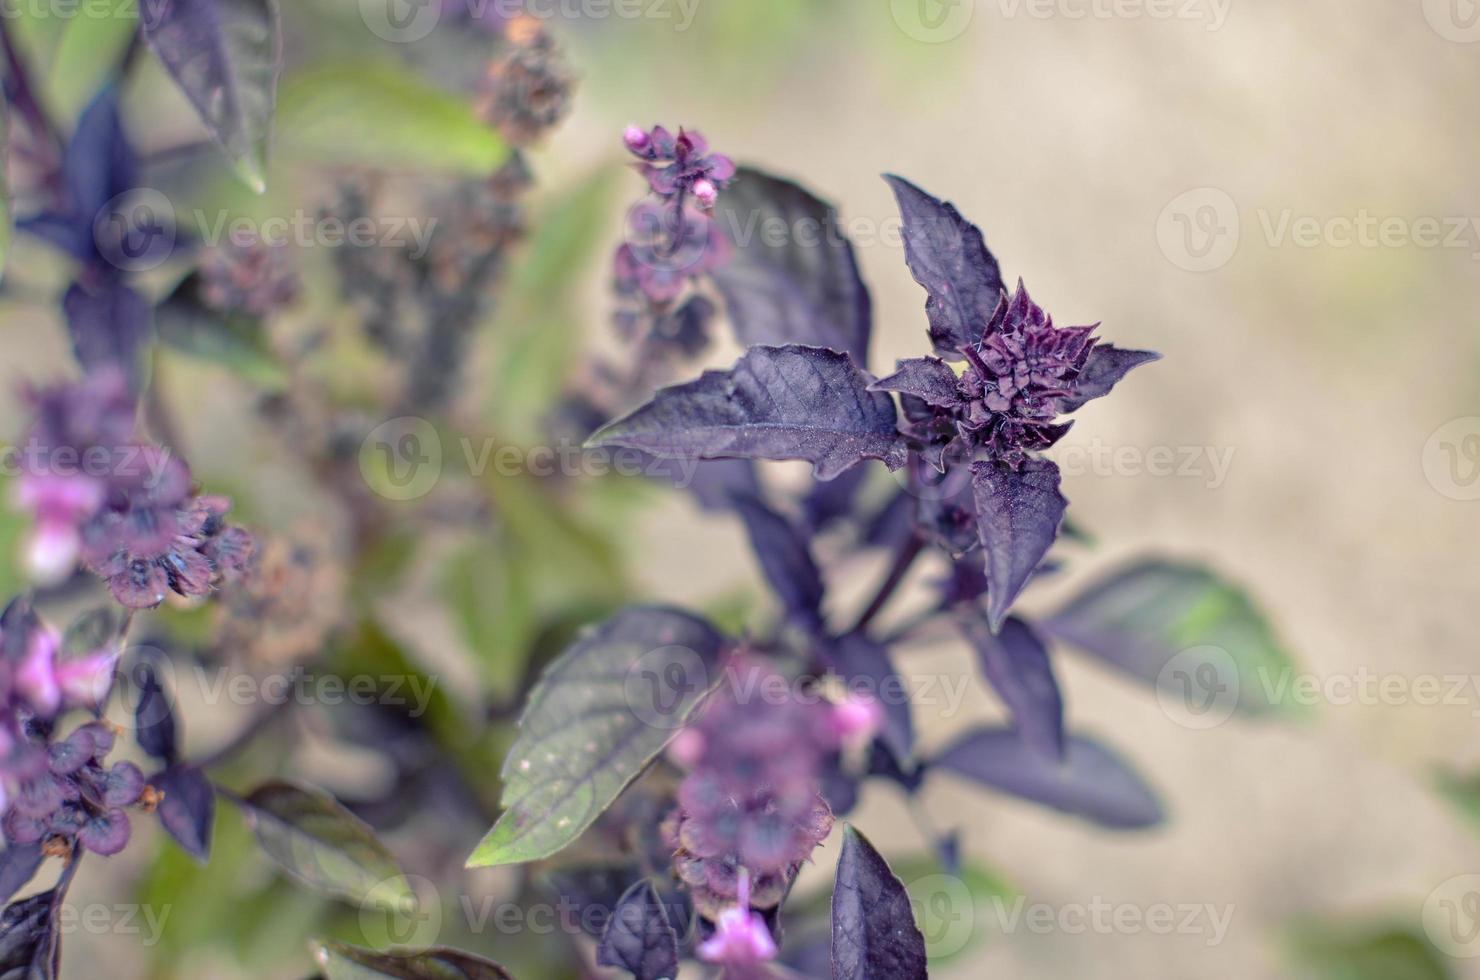 Ypung purple basil leaves and flowers at spring photo